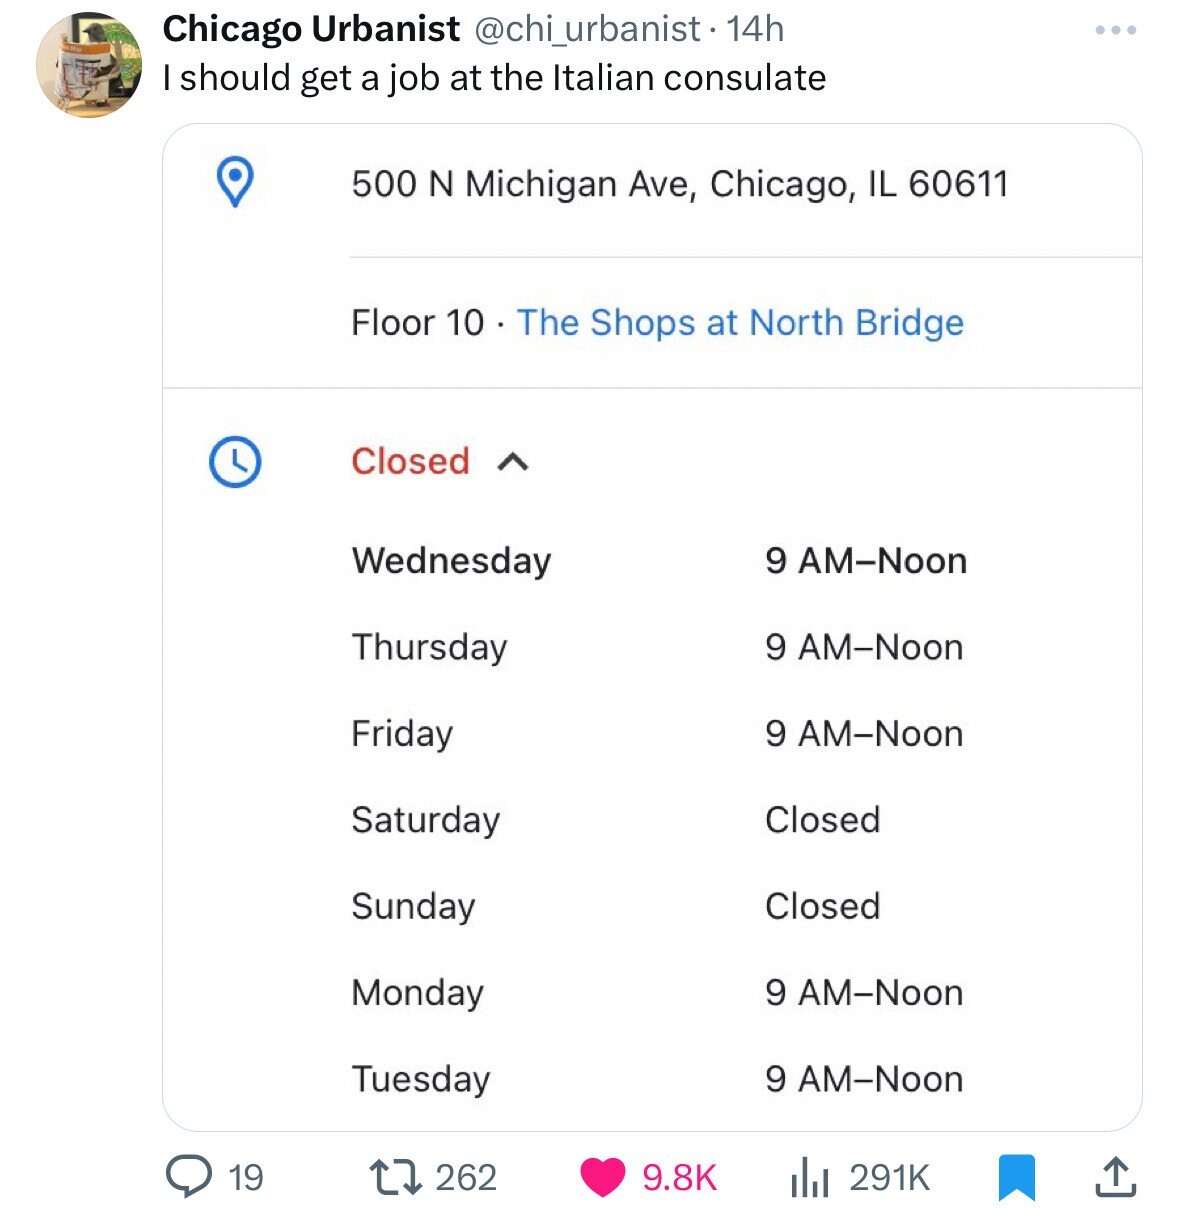 document - 124 Chicago Urbanist 14h I should get a job at the Italian consulate 19 500 N Michigan Ave, Chicago, Il 60611 Floor 10. The Shops at North Bridge Closed A Wednesday Thursday Friday Saturday Sunday Monday Tuesday 262 9 AmNoon 9 AmNoon 9 AmNoon C